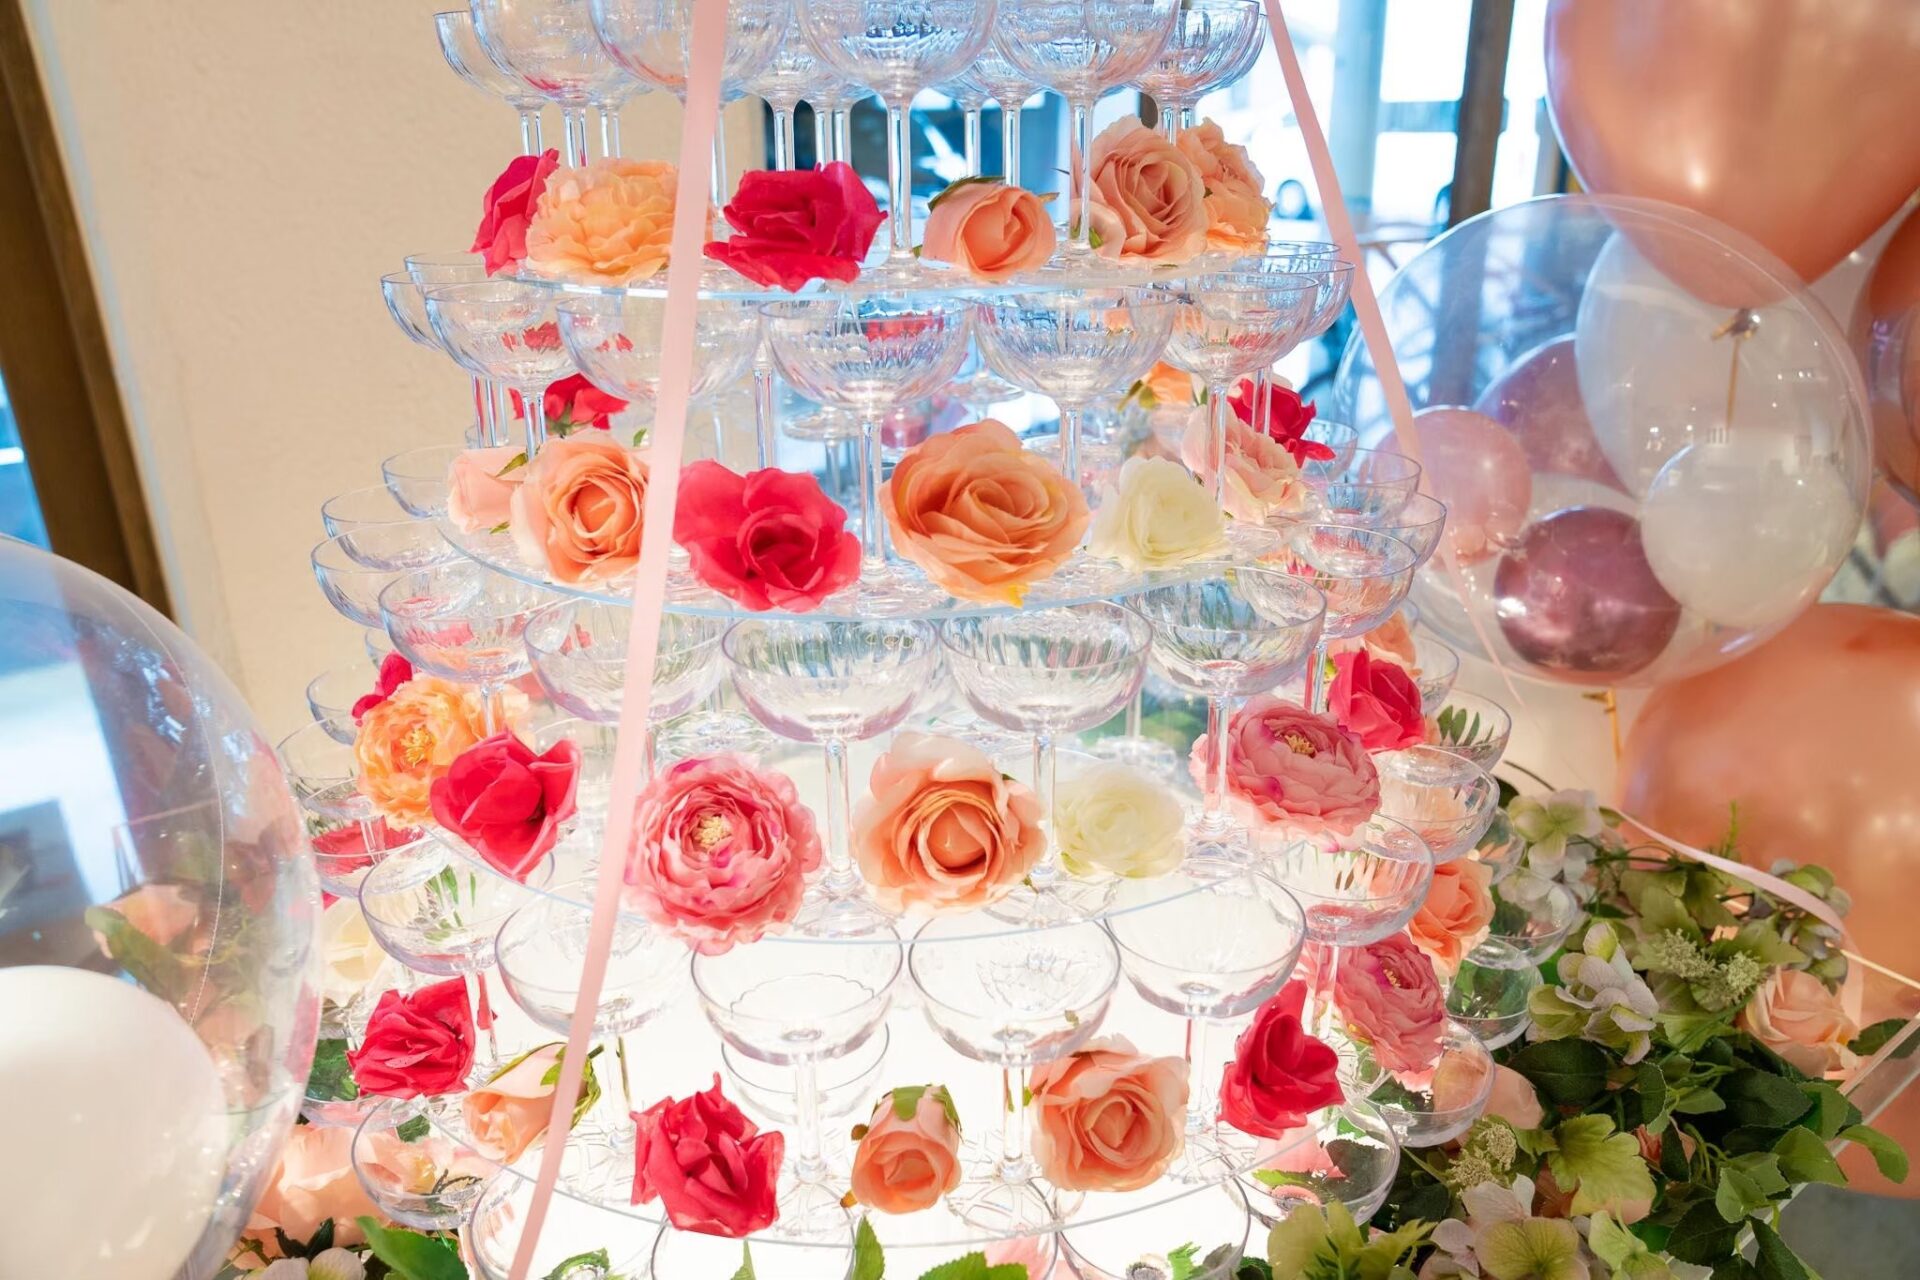 Round champagne tower with flowers laid out on each tier along with a glass.